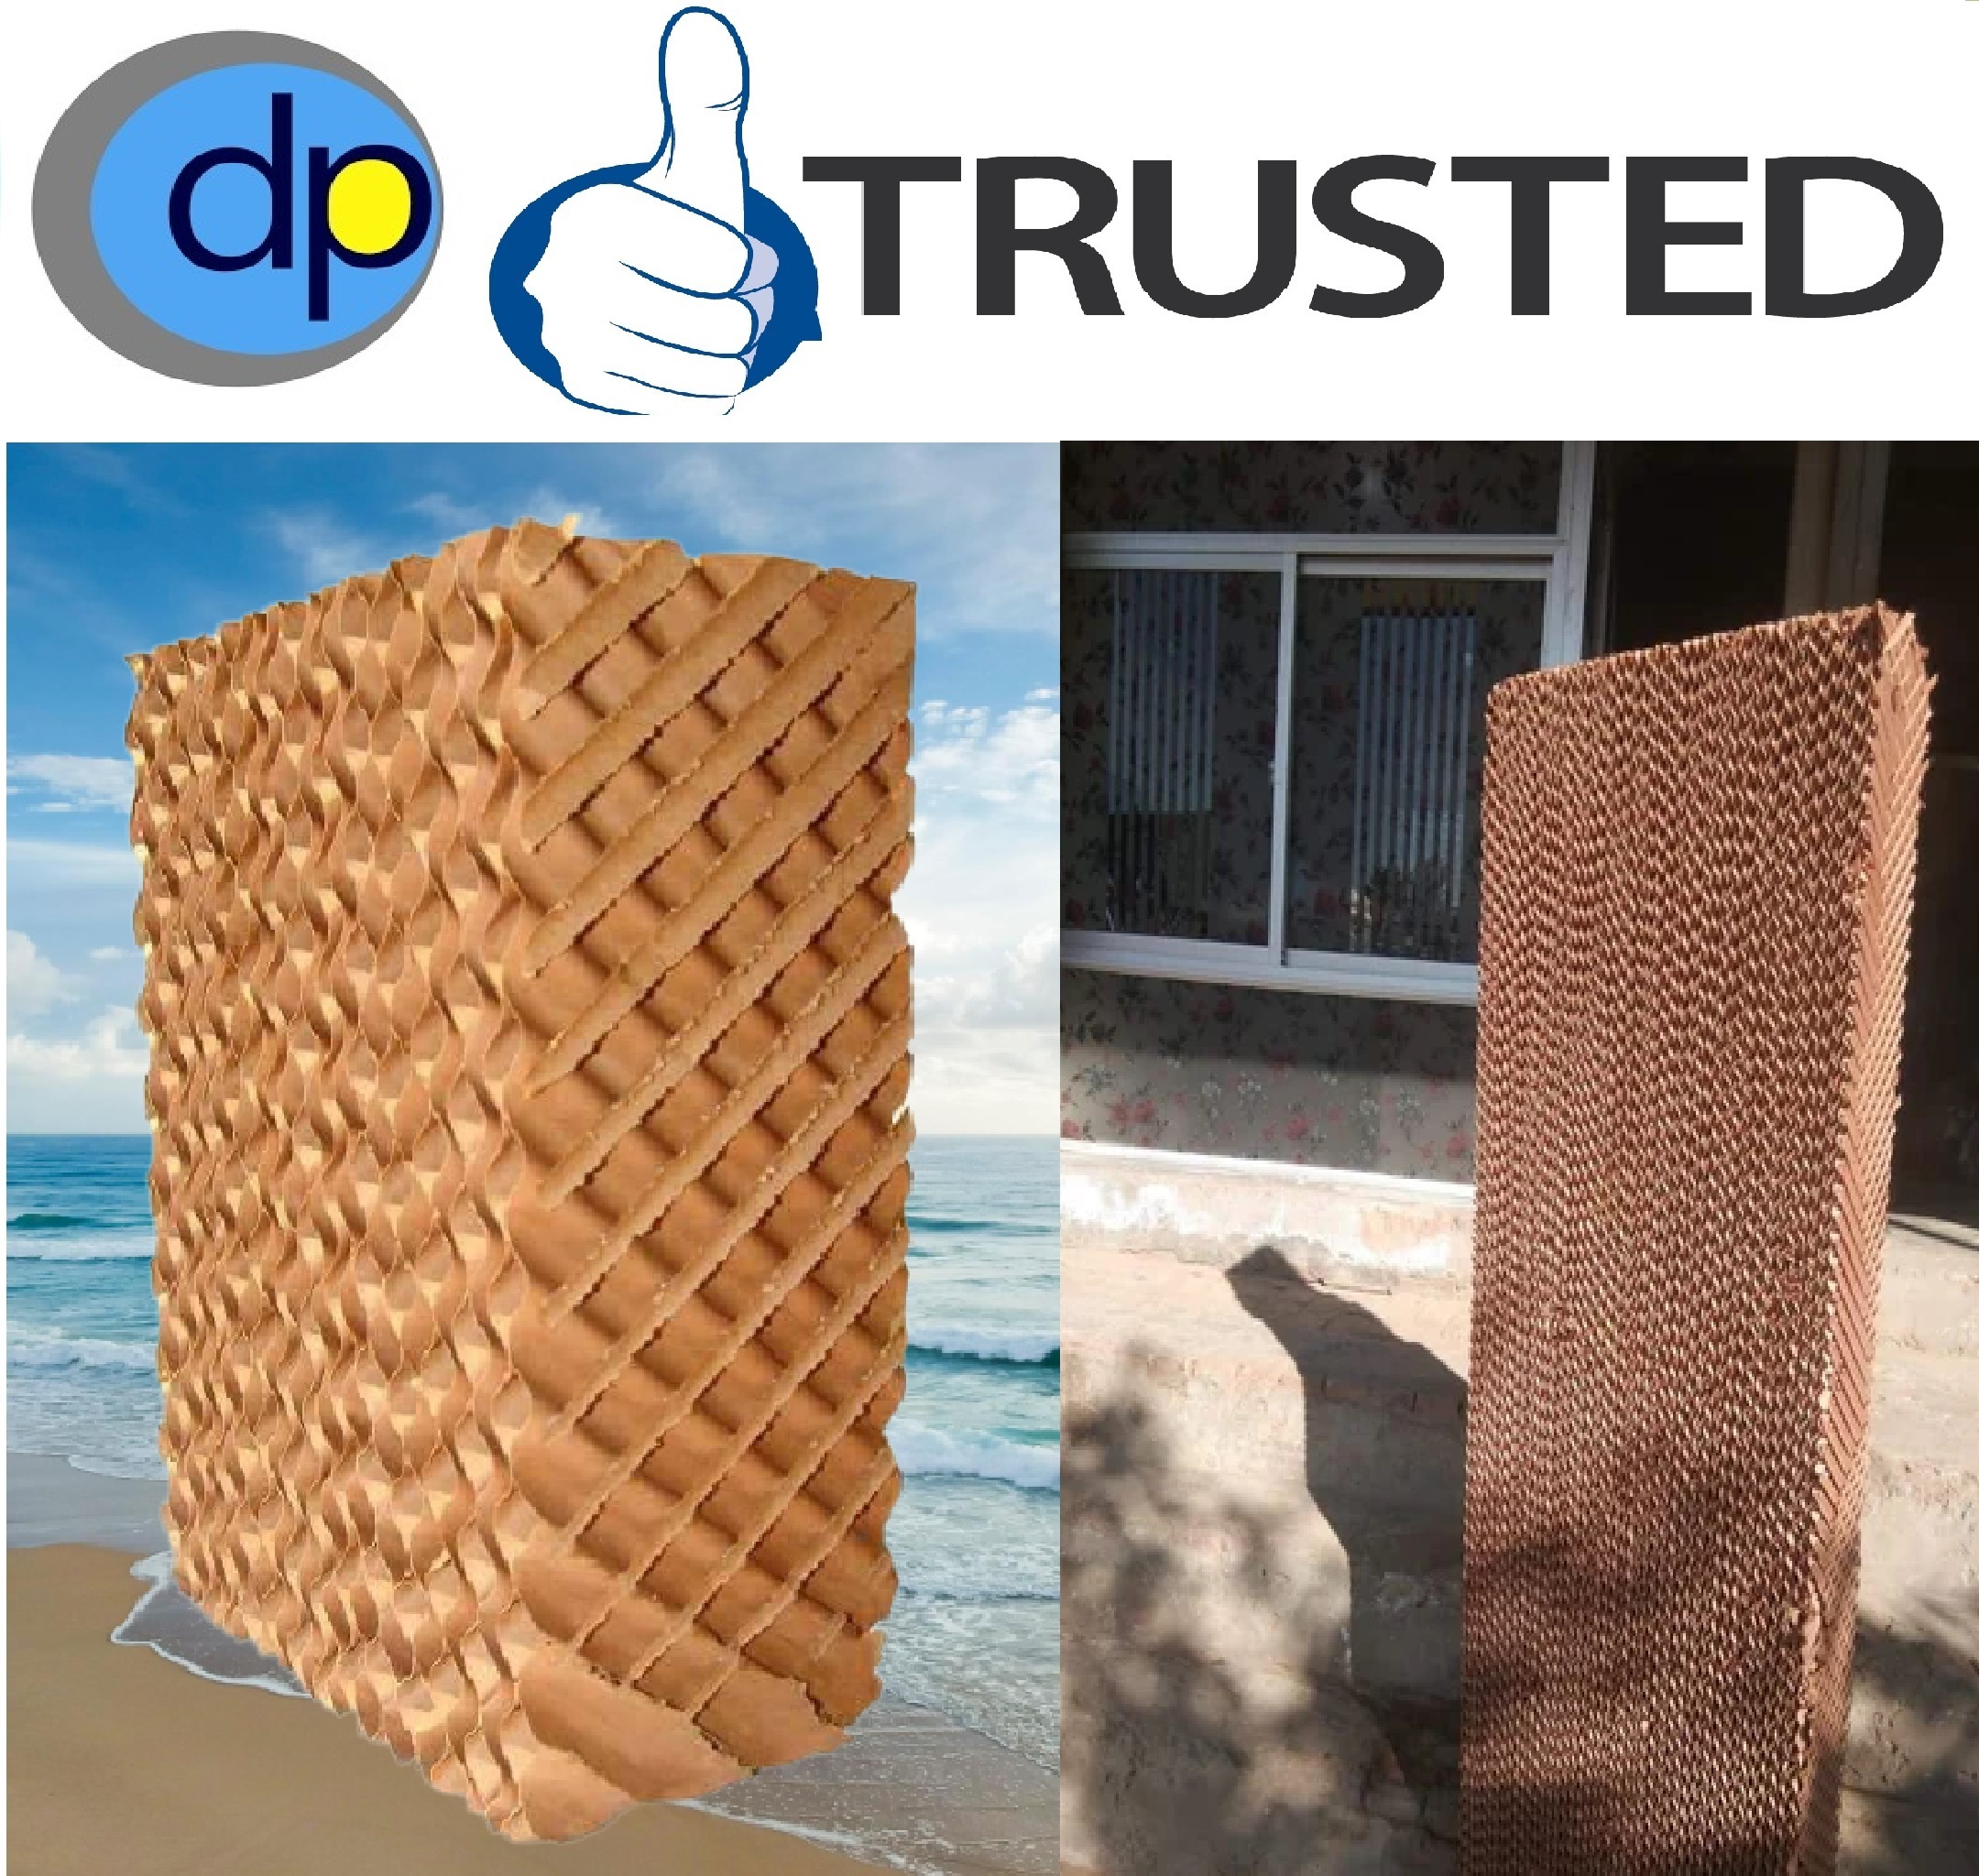 Cellulose cooling pad Manufacturers in Greater Noida - D.P.ENGINEERS